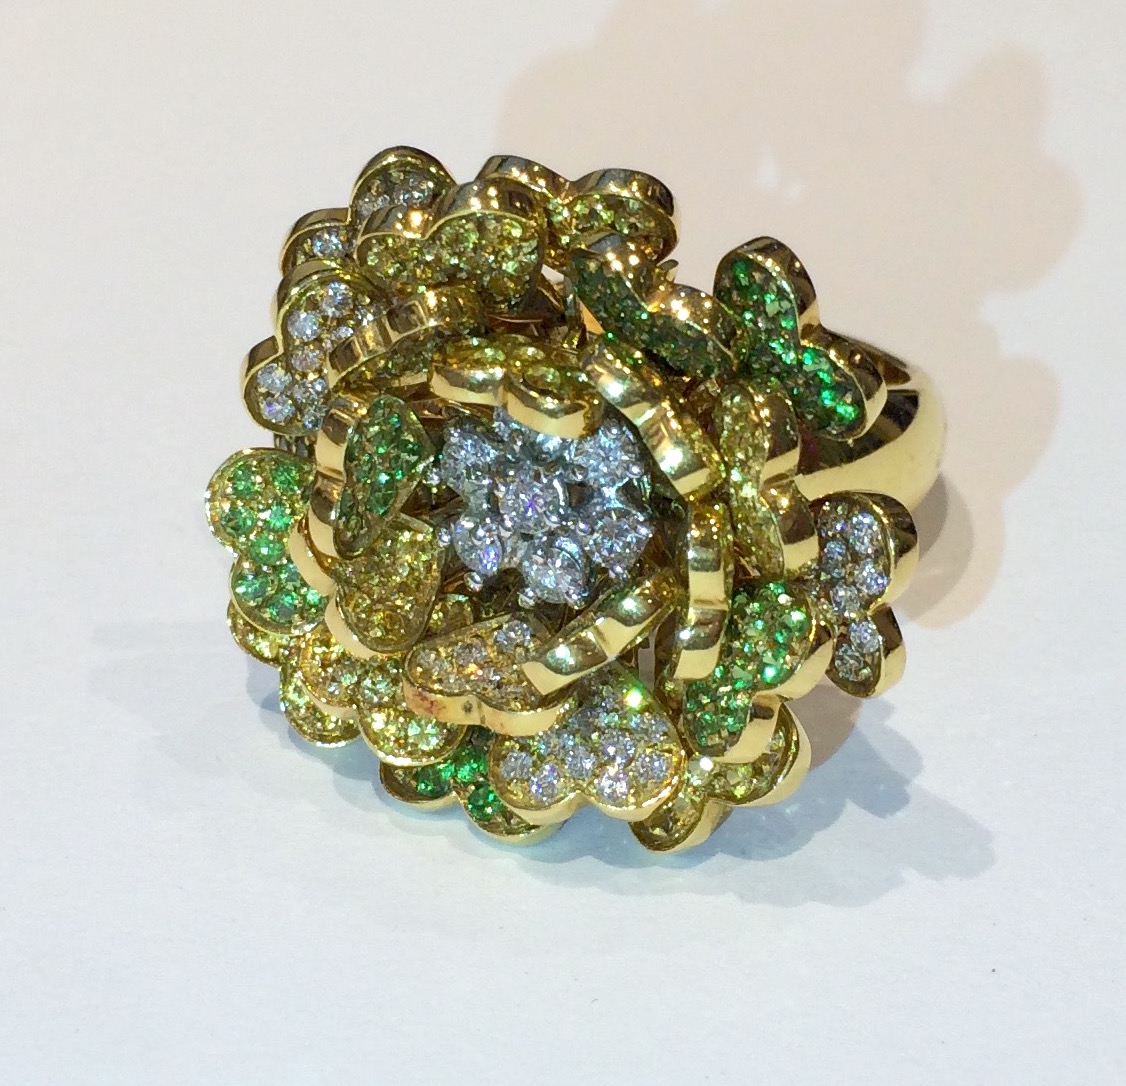 Chanel, Paris “Camellia” 18k yellow gold articulated blossom ring set with 75 round full-cut white diamonds (approx. 1.50 carats TW) and 101 round full-cut yellow diamonds (approx. 1.00 carat TW) and 94 round full-cut demantoid garnets (approx. 1.00 carat TW) all in 24 heart shaped hinged and moveable flower petals with a central cluster of 7 round full-cut diamonds, signed: Chanel in a rectangle, 750 in a cartouche, size: 7 1/4, c. 1980’s